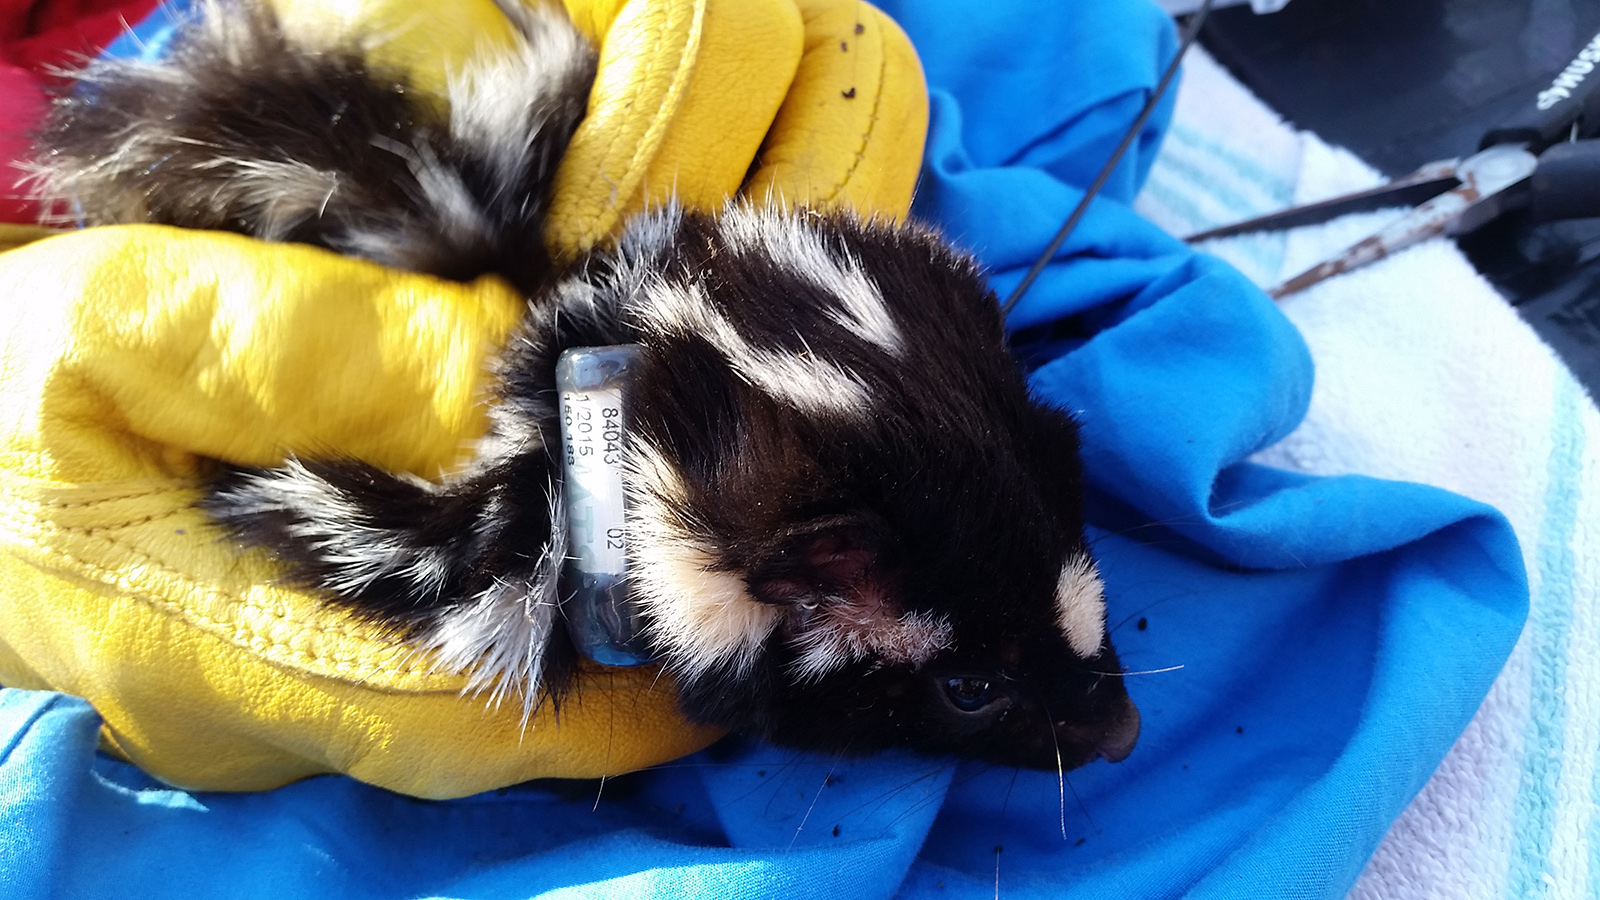 Eastern spotted skunk being fitted with a radio collar. Photo courtesy of Virginia Tech